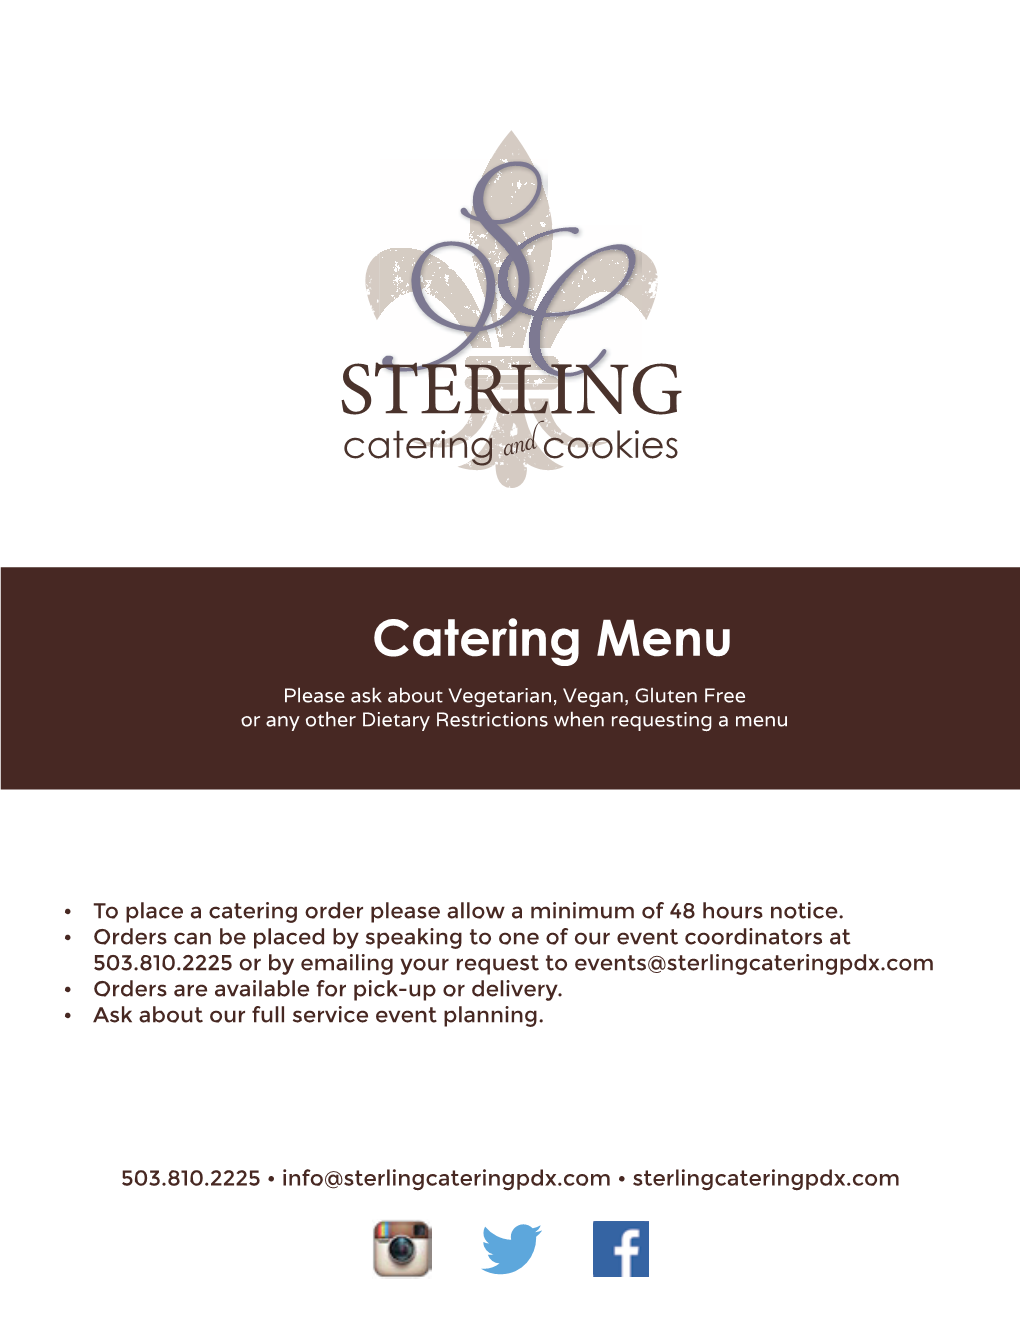 Catering Menu Please Ask About Vegetarian, Vegan, Gluten Free Or Any Other Dietary Restrictions When Requesting a Menu